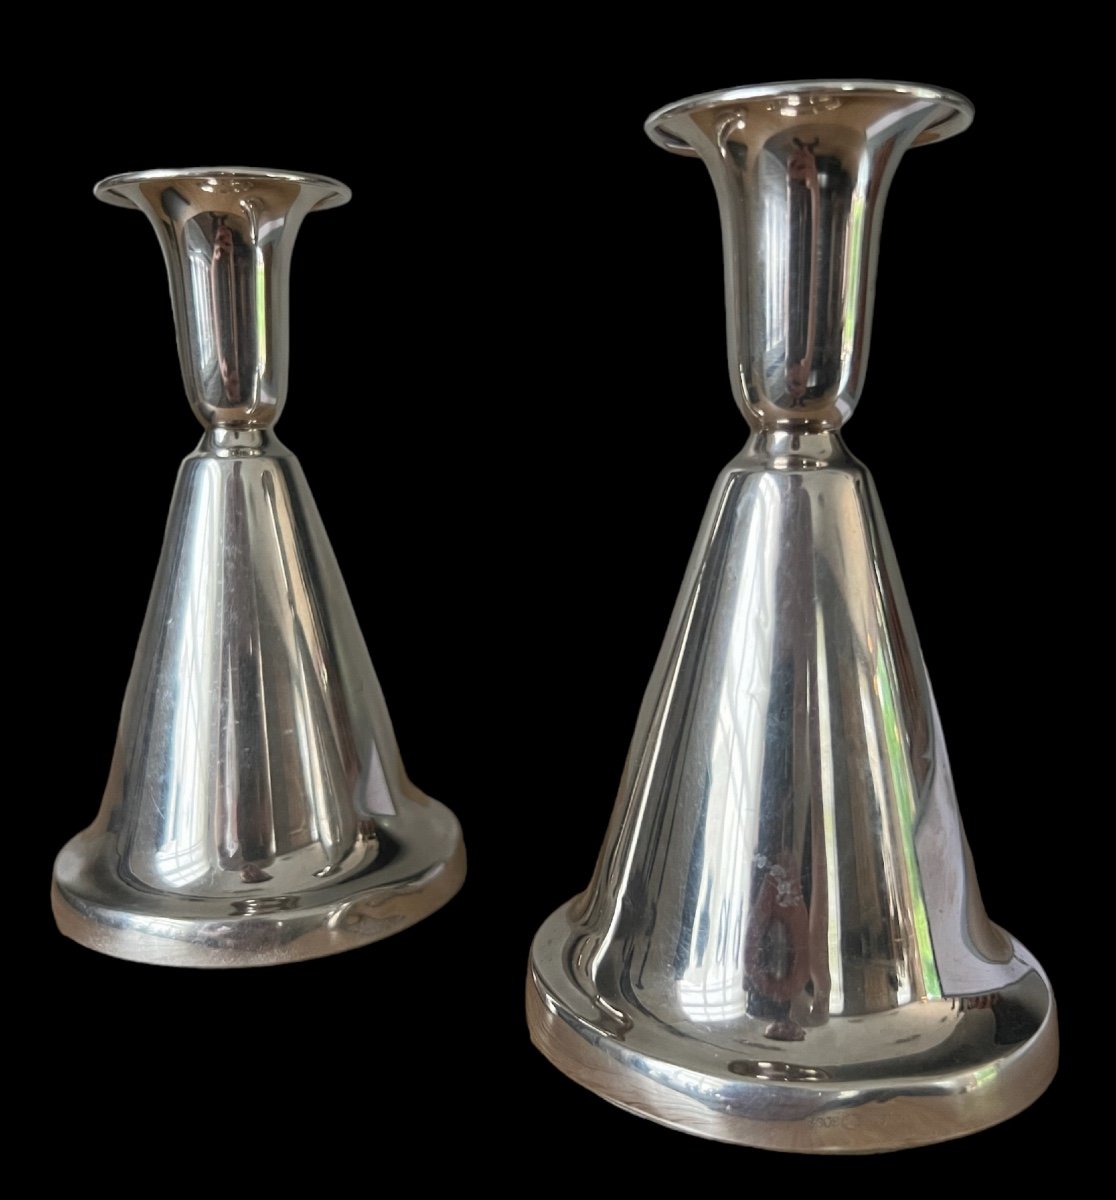 Pair Of Candlesticks In Sterling Silver By Thorvald Marthinsen - Tonsberg (norway) - 1900-1925-photo-1